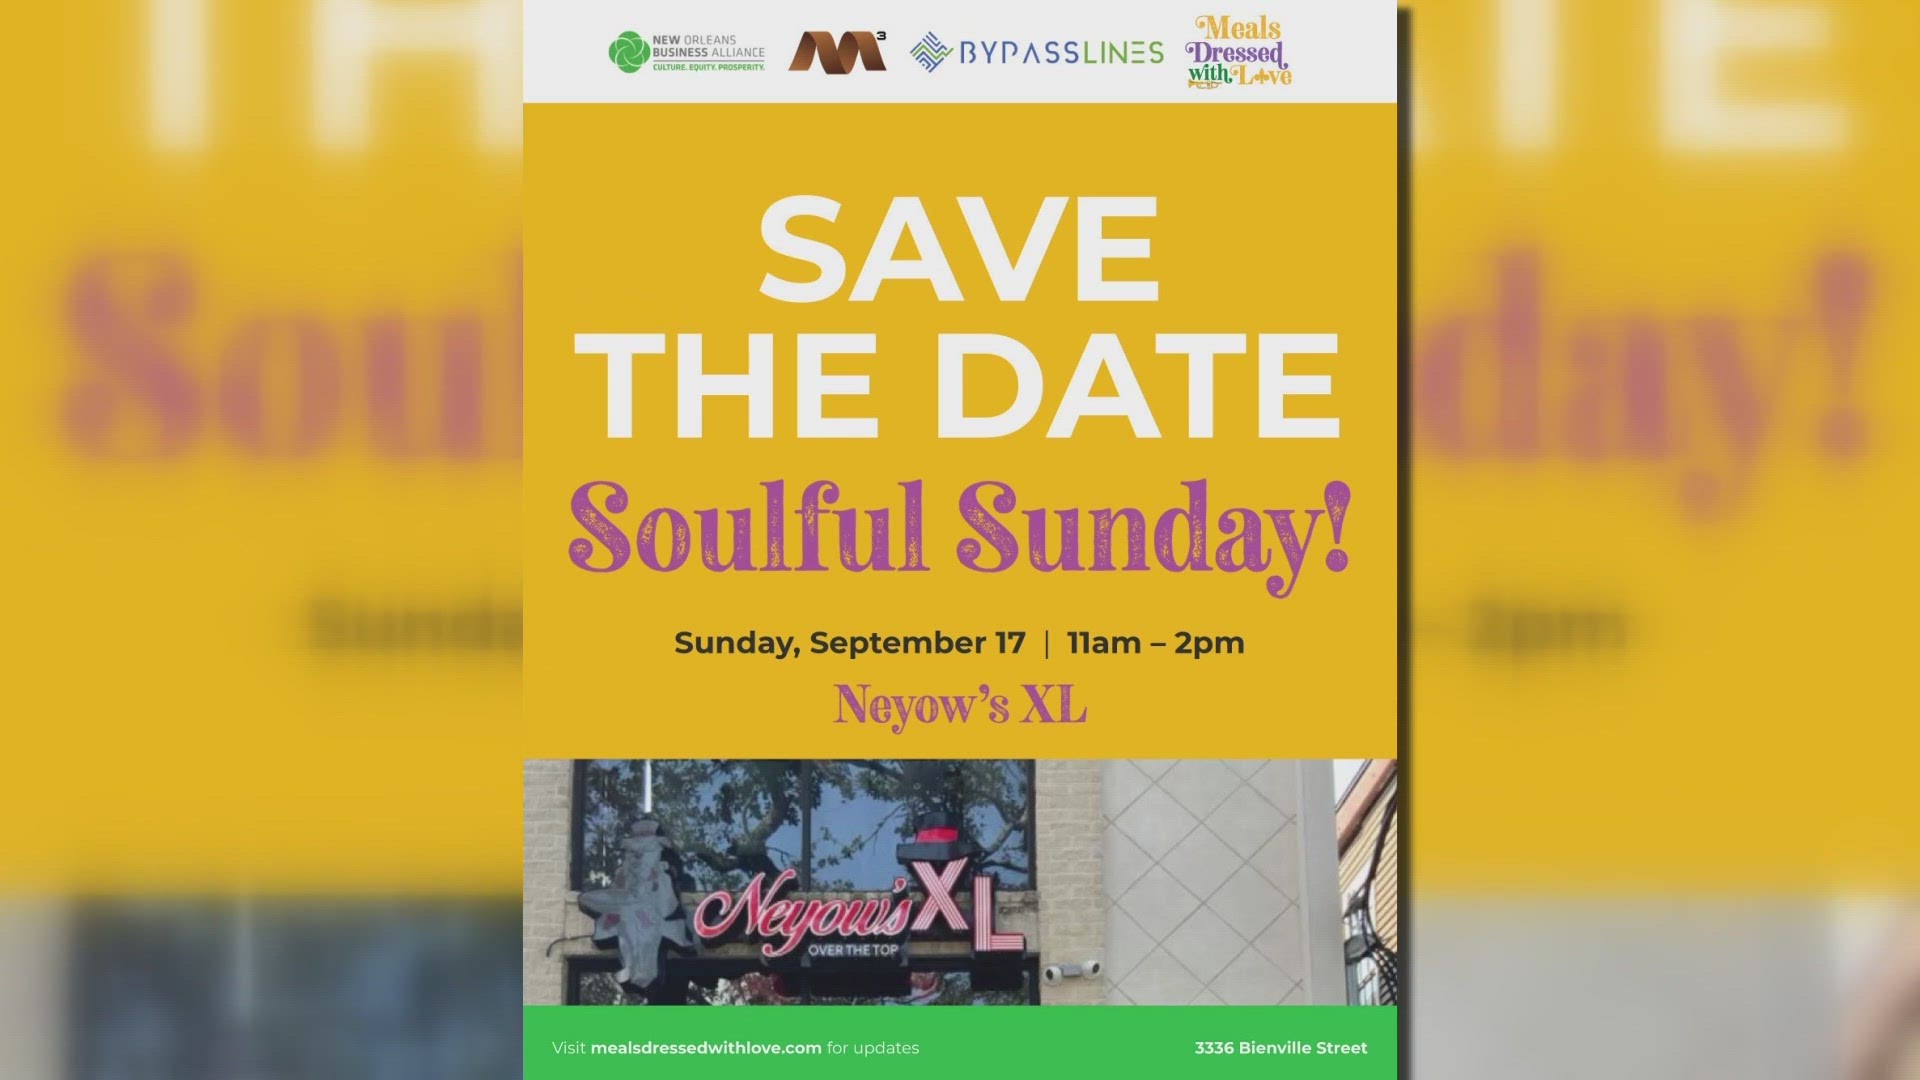 In support of the Meals Dressed with Love Program, My Mogul Media, BypassLines and The New Orleans Business Alliance will host “Soulful Sundays” beginning July.